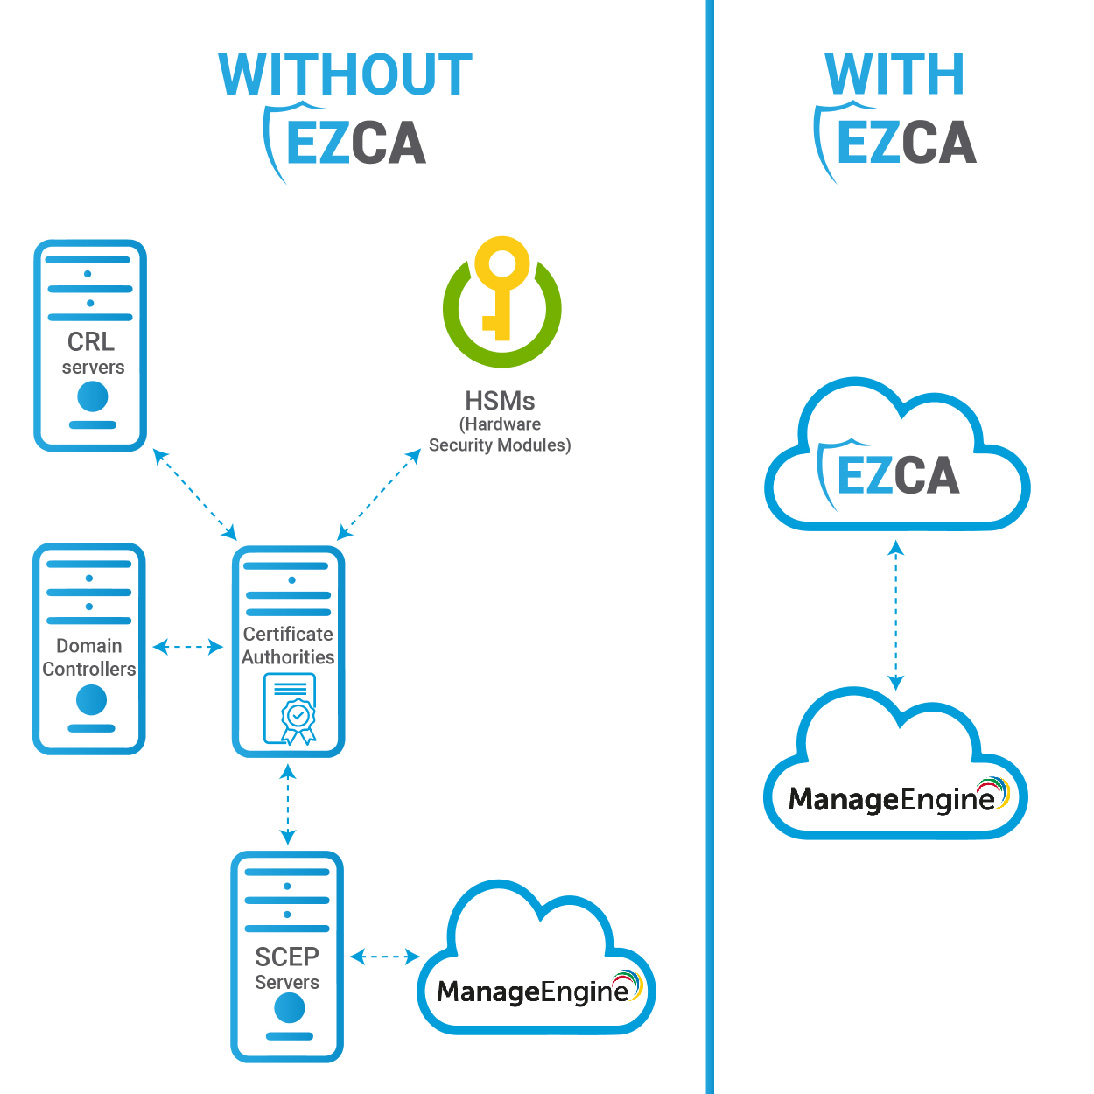 How to Create a Certificate Authority for ManageEngine With EZCA and Without EZCA